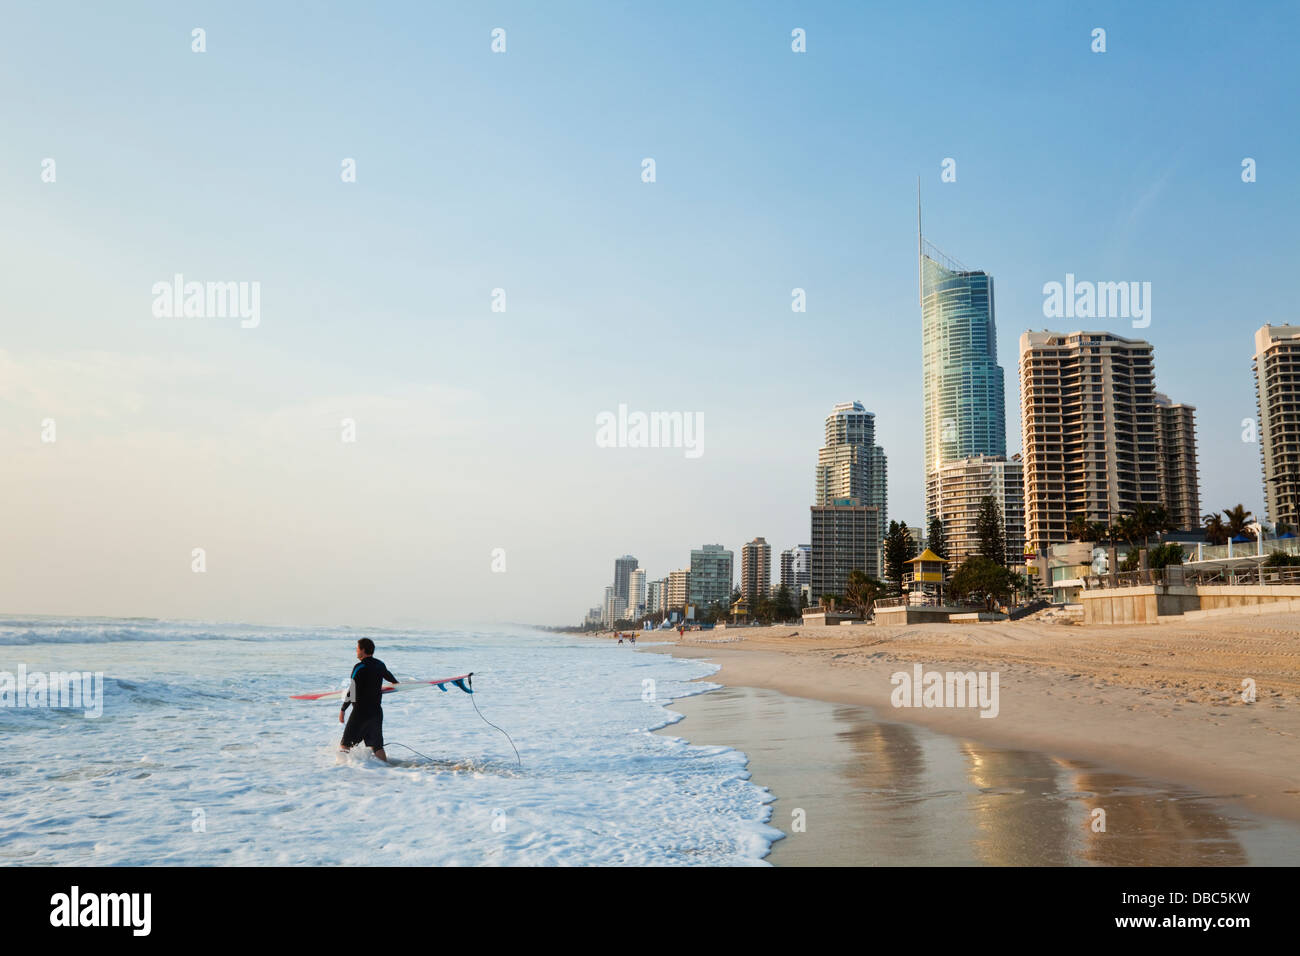 Surfer walking into surf with city skyline in background. Surfers Paradise, Gold Coast, Queensland, Australia Stock Photo